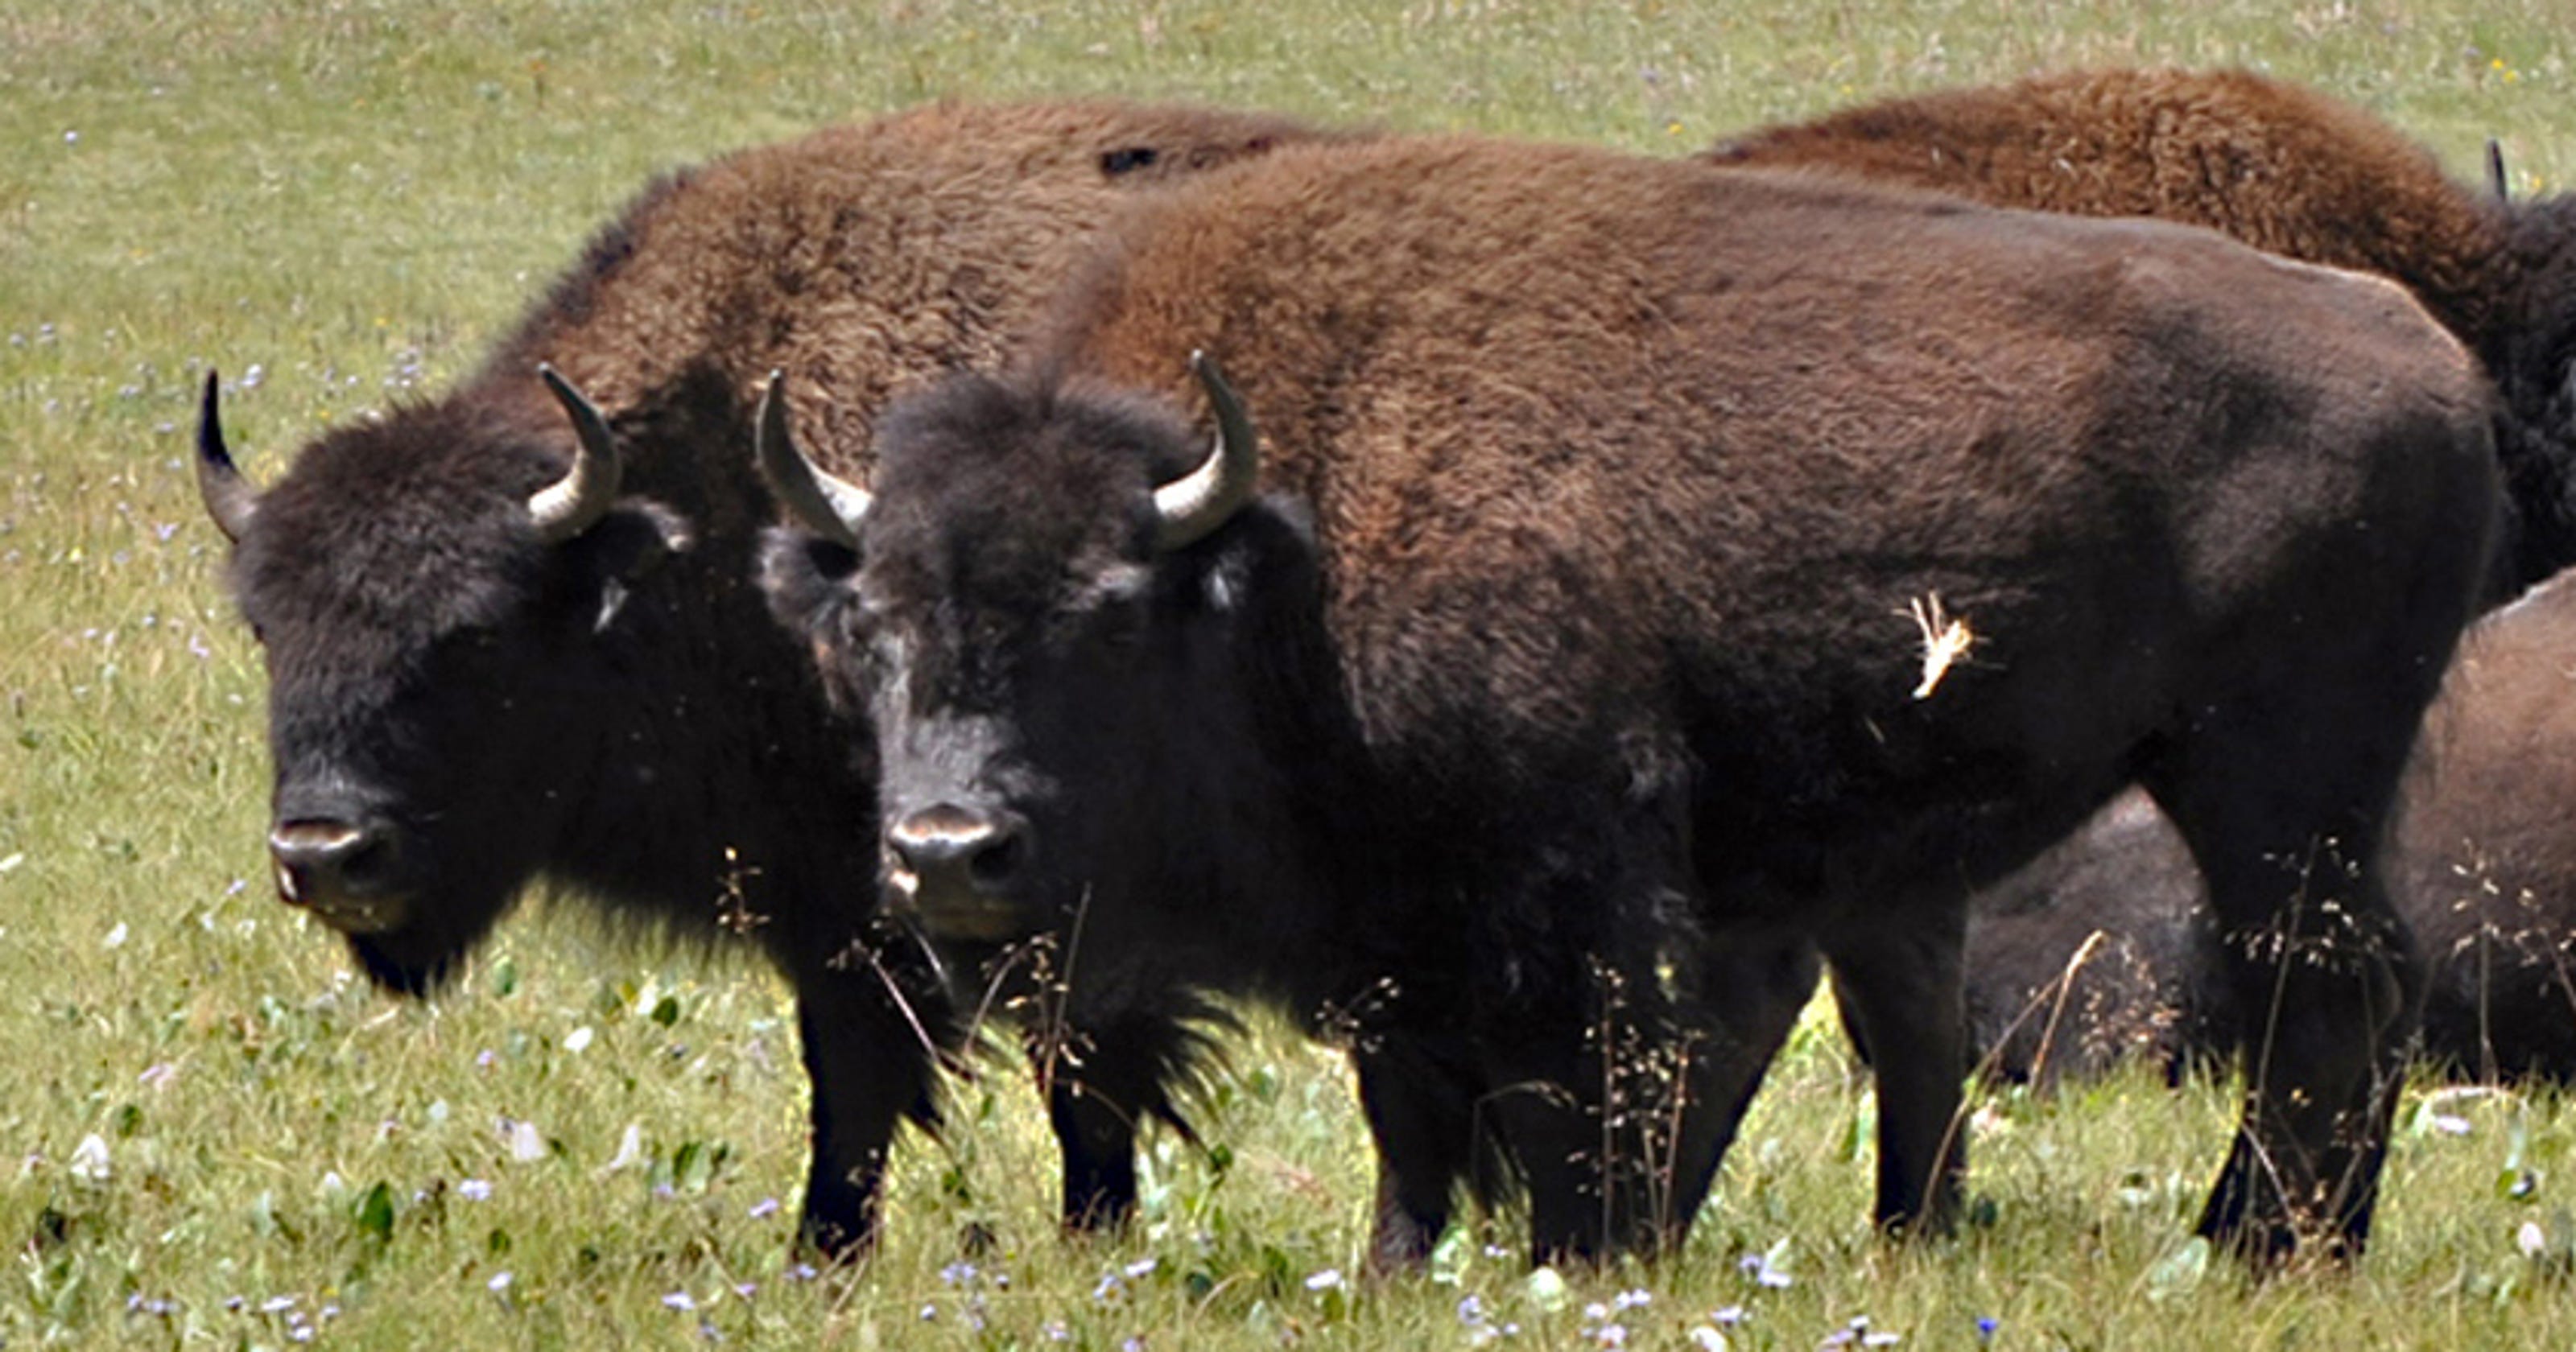 grand-canyon-seeks-comment-on-managing-bison-herd